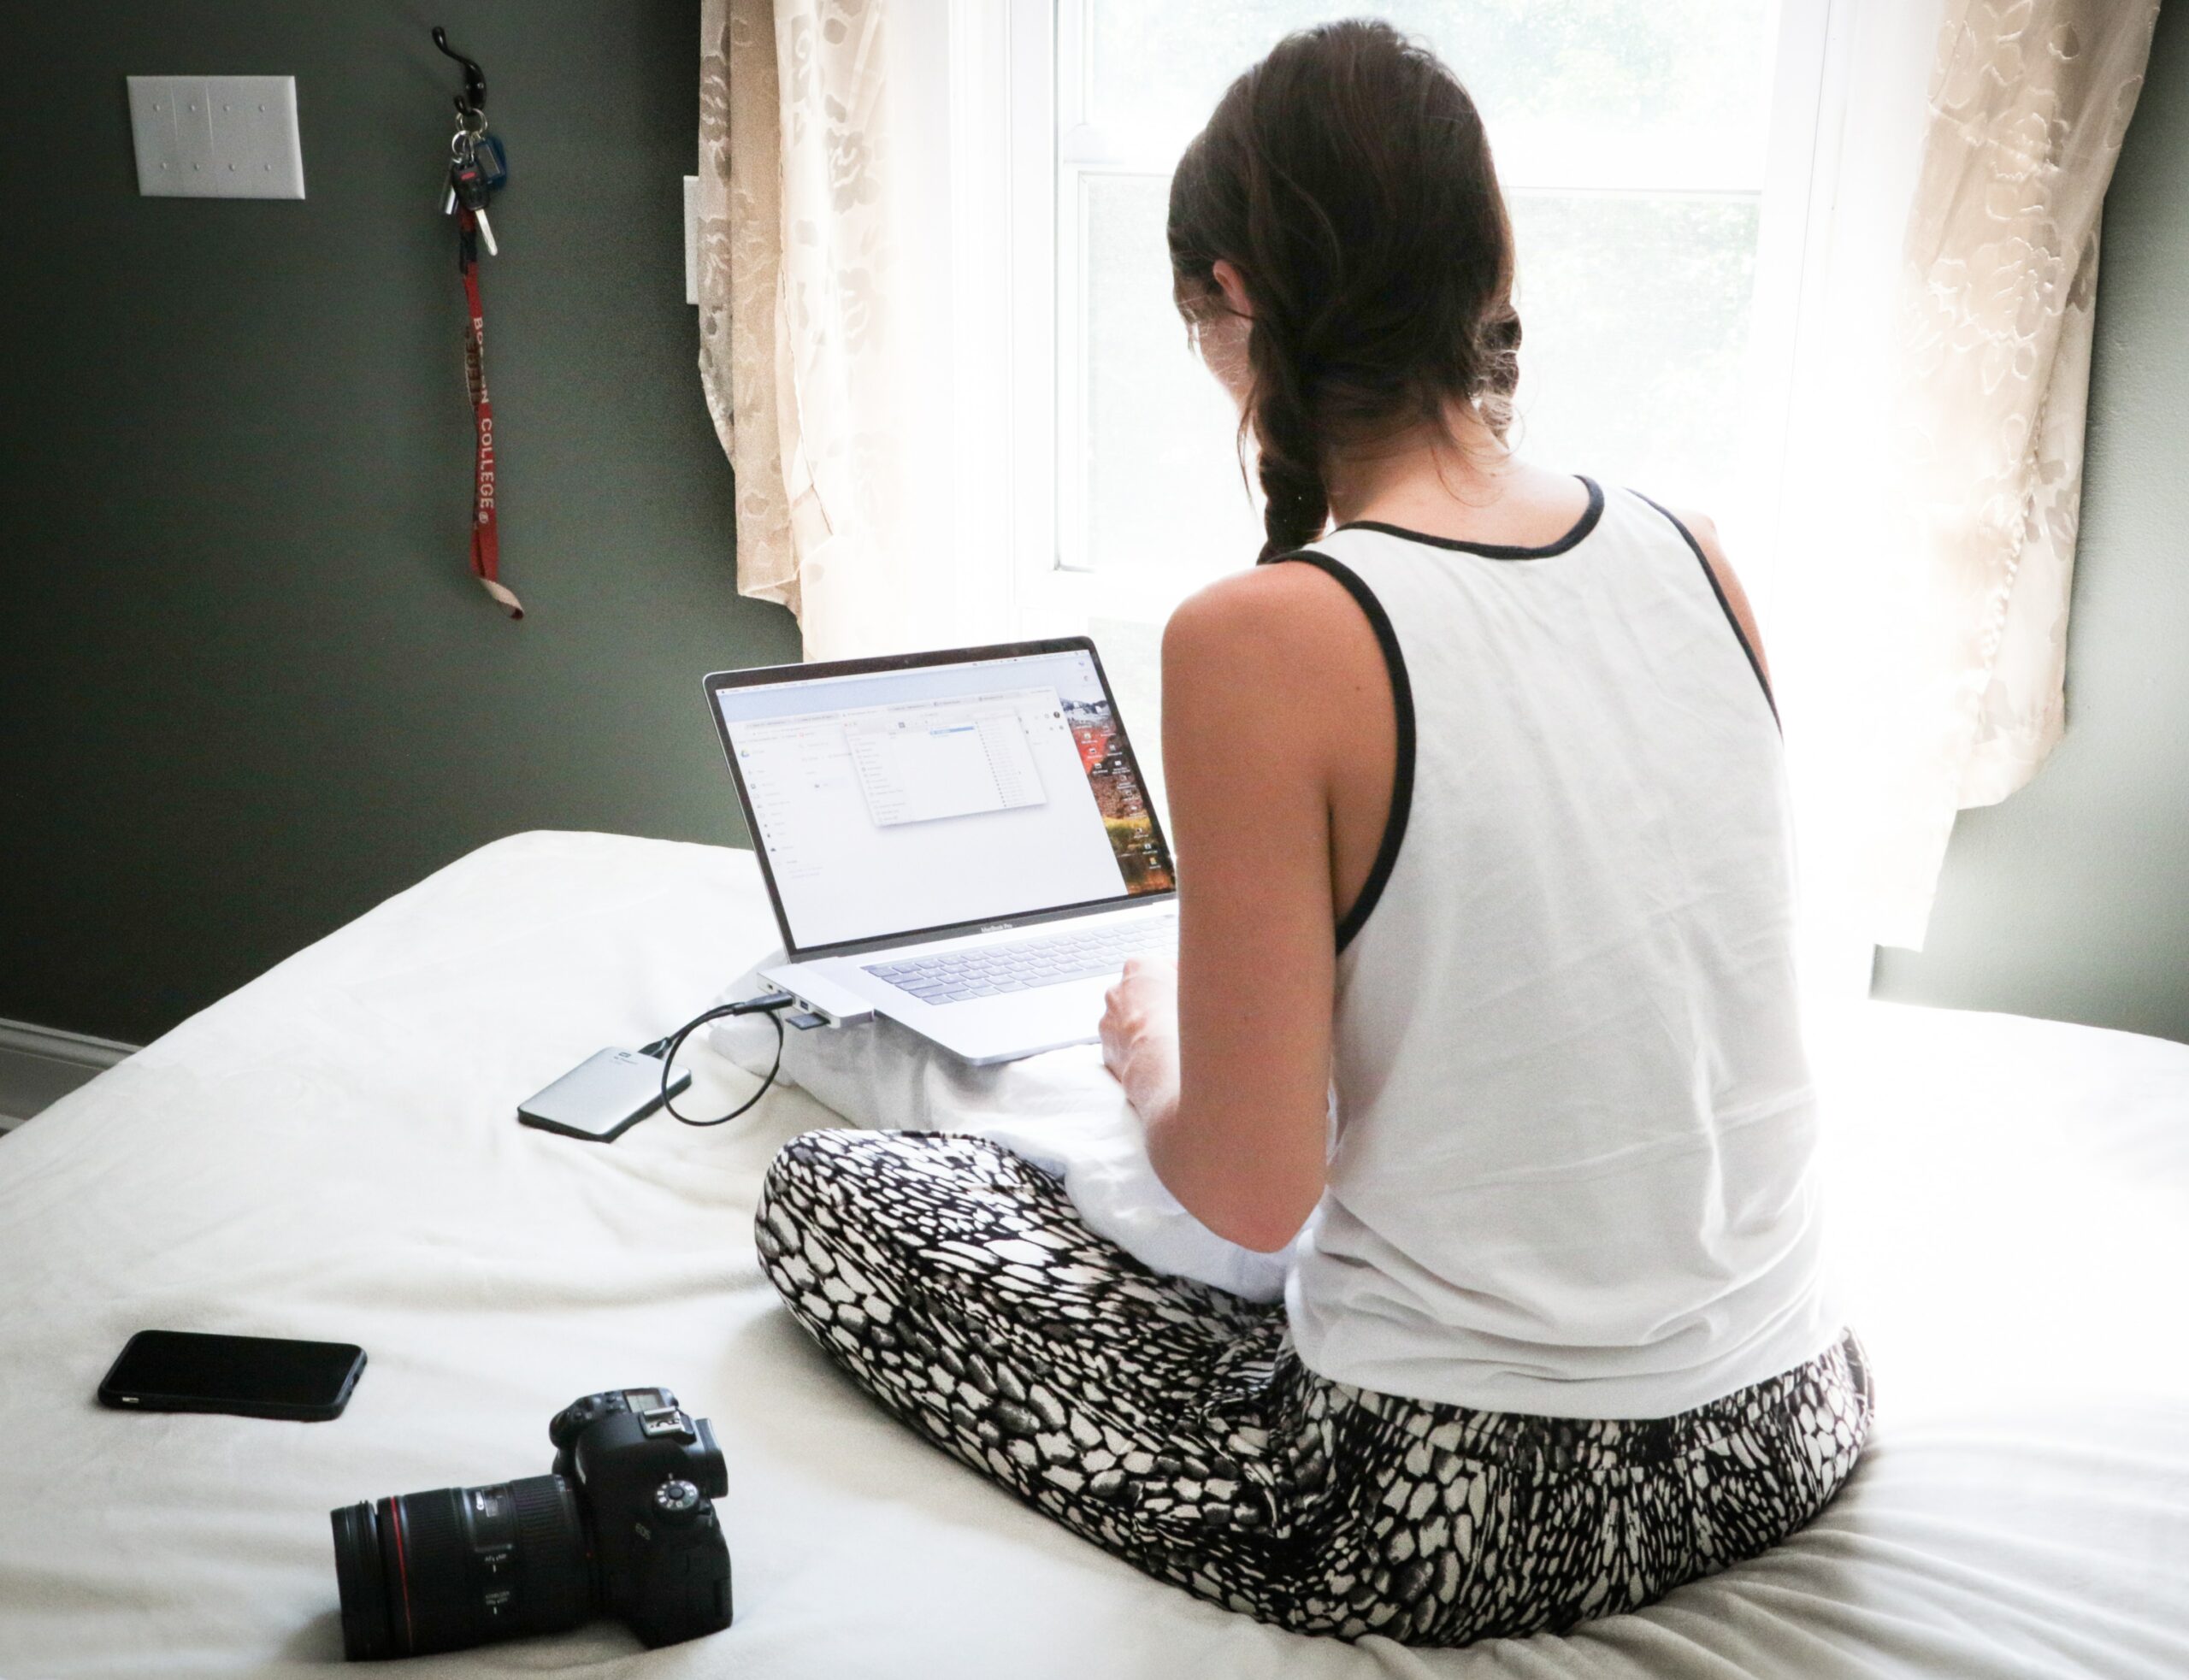 Girl sitting cross-legged on a bed with a laptop on her lap